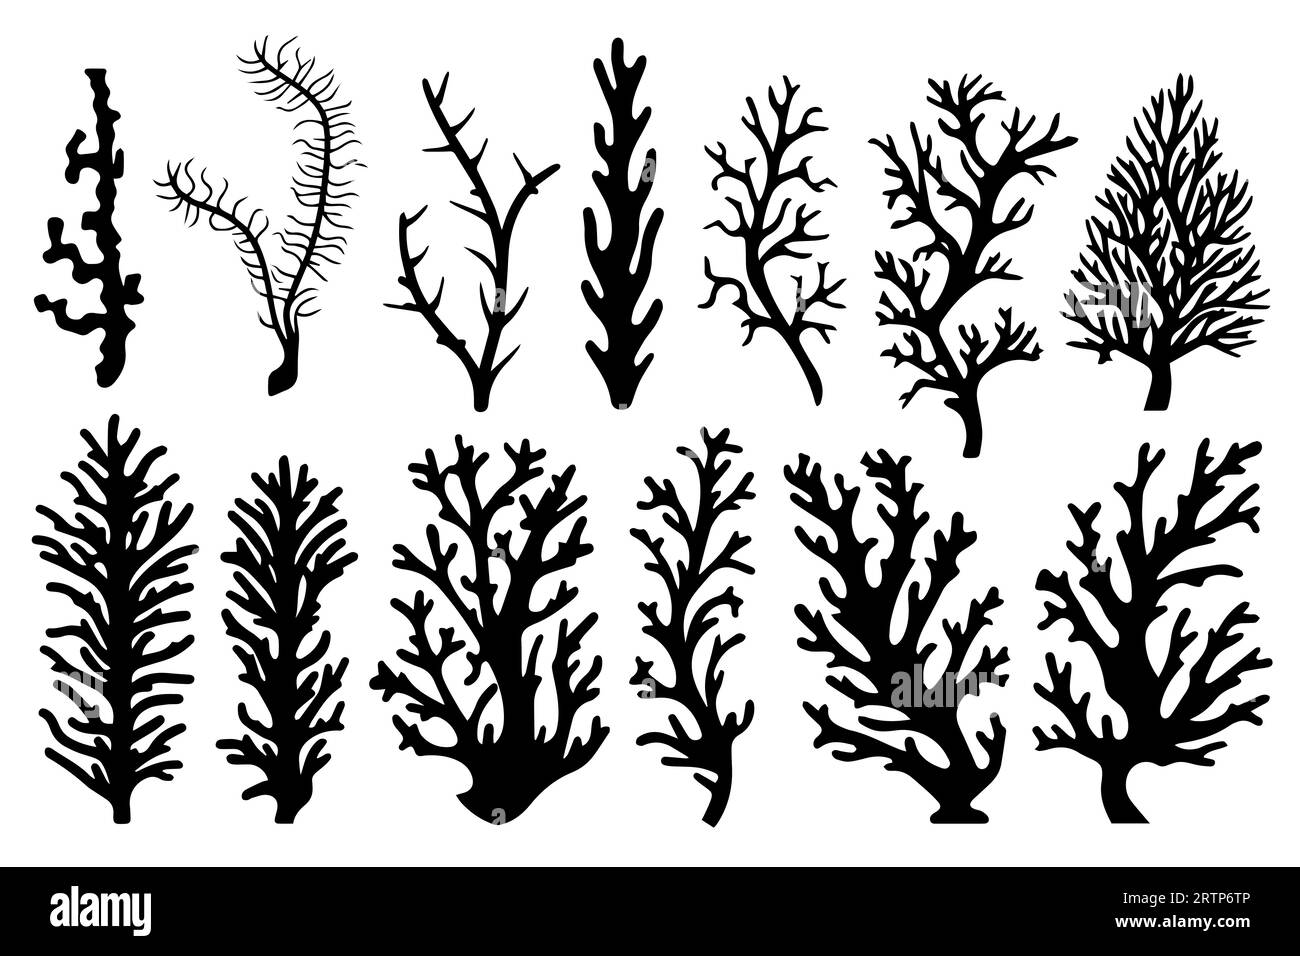 Flat seaweed Black and White Stock Photos & Images - Page 3 - Alamy